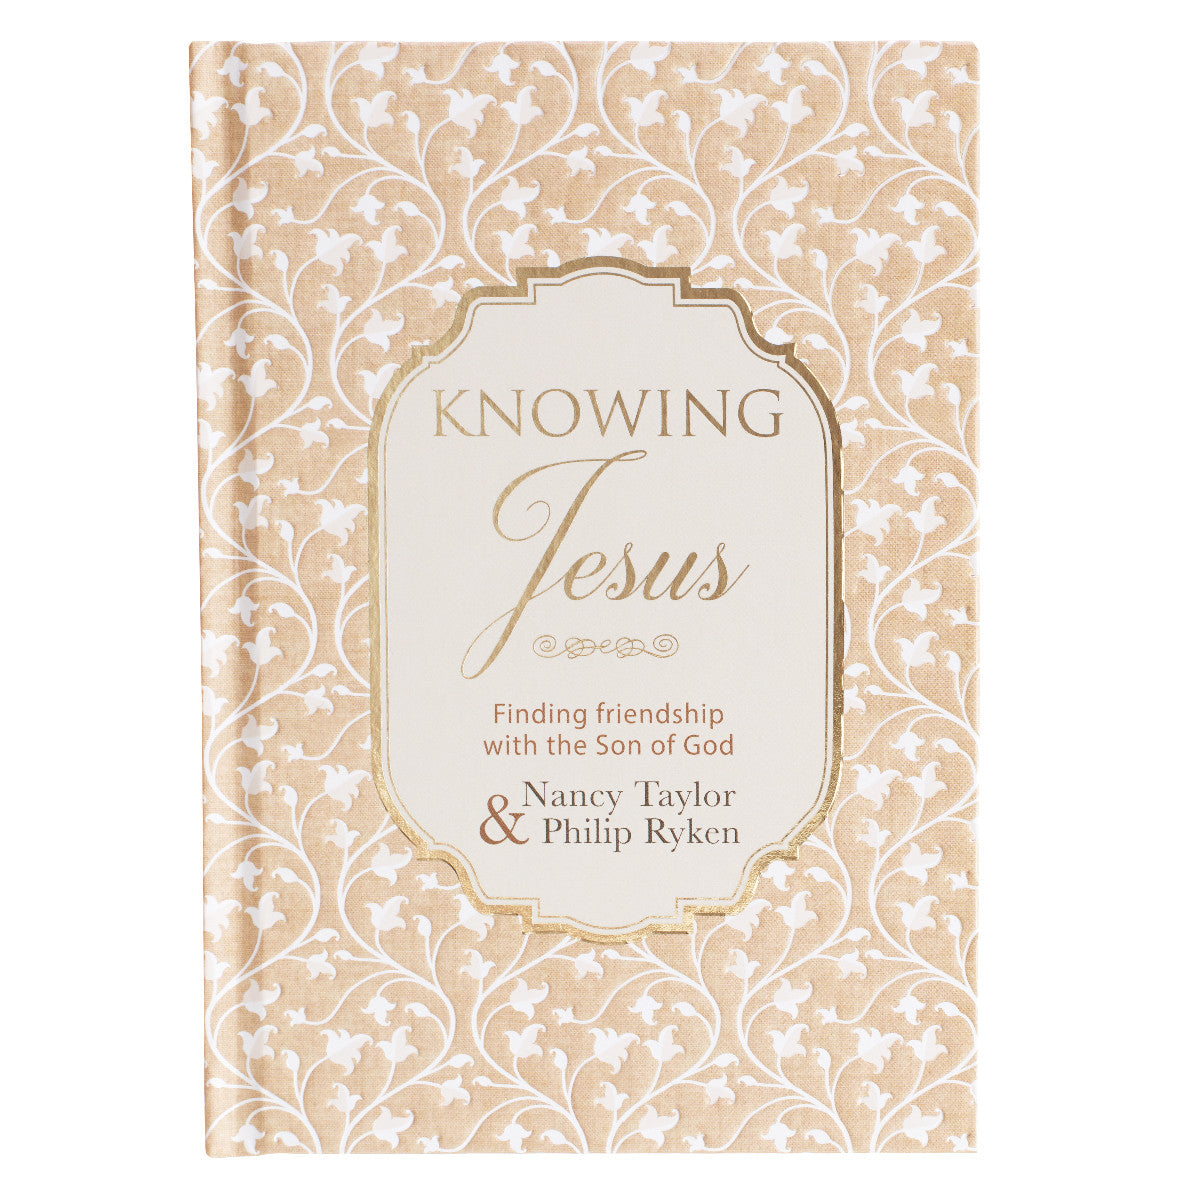 ROCKONLINE | New Creation Church | NCC | Joseph Prince | ROCK Bookshop | ROCK Bookstore | Star Vista | Knowing Jesus | Questions & Answers | Free delivery for Singapore Orders above $50.